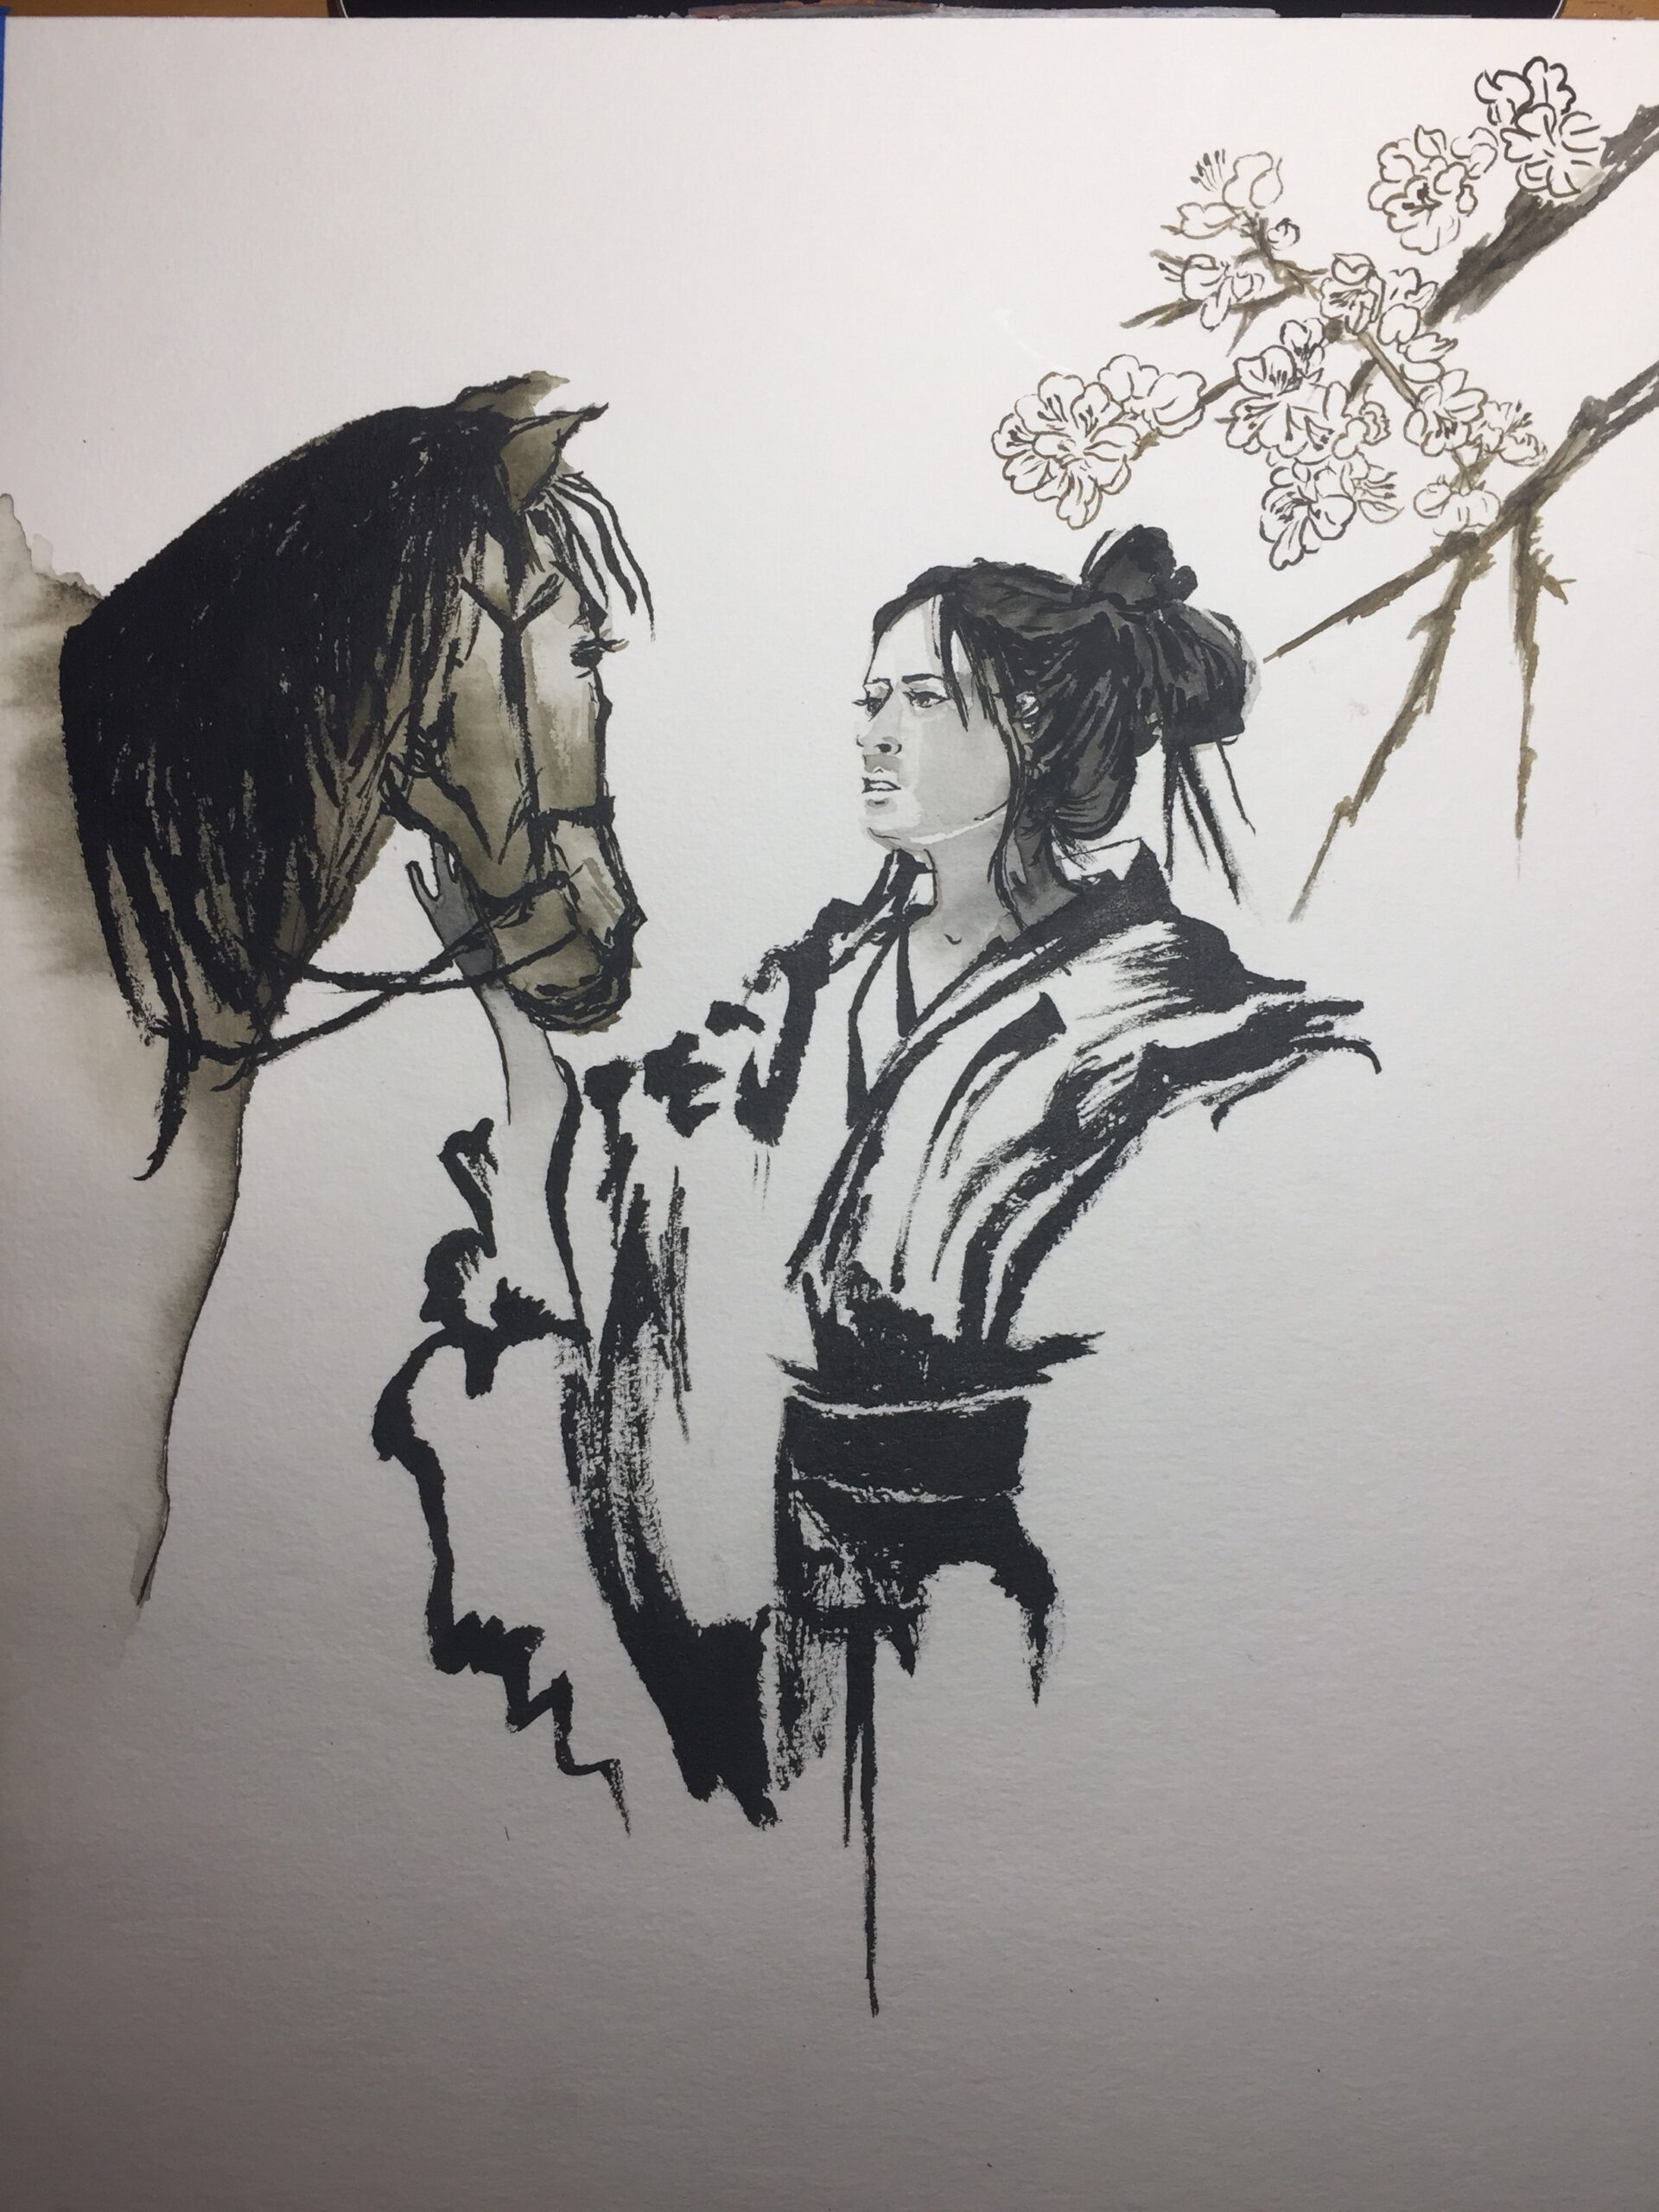 Horse and woman's face painted with a mix of sepia and black